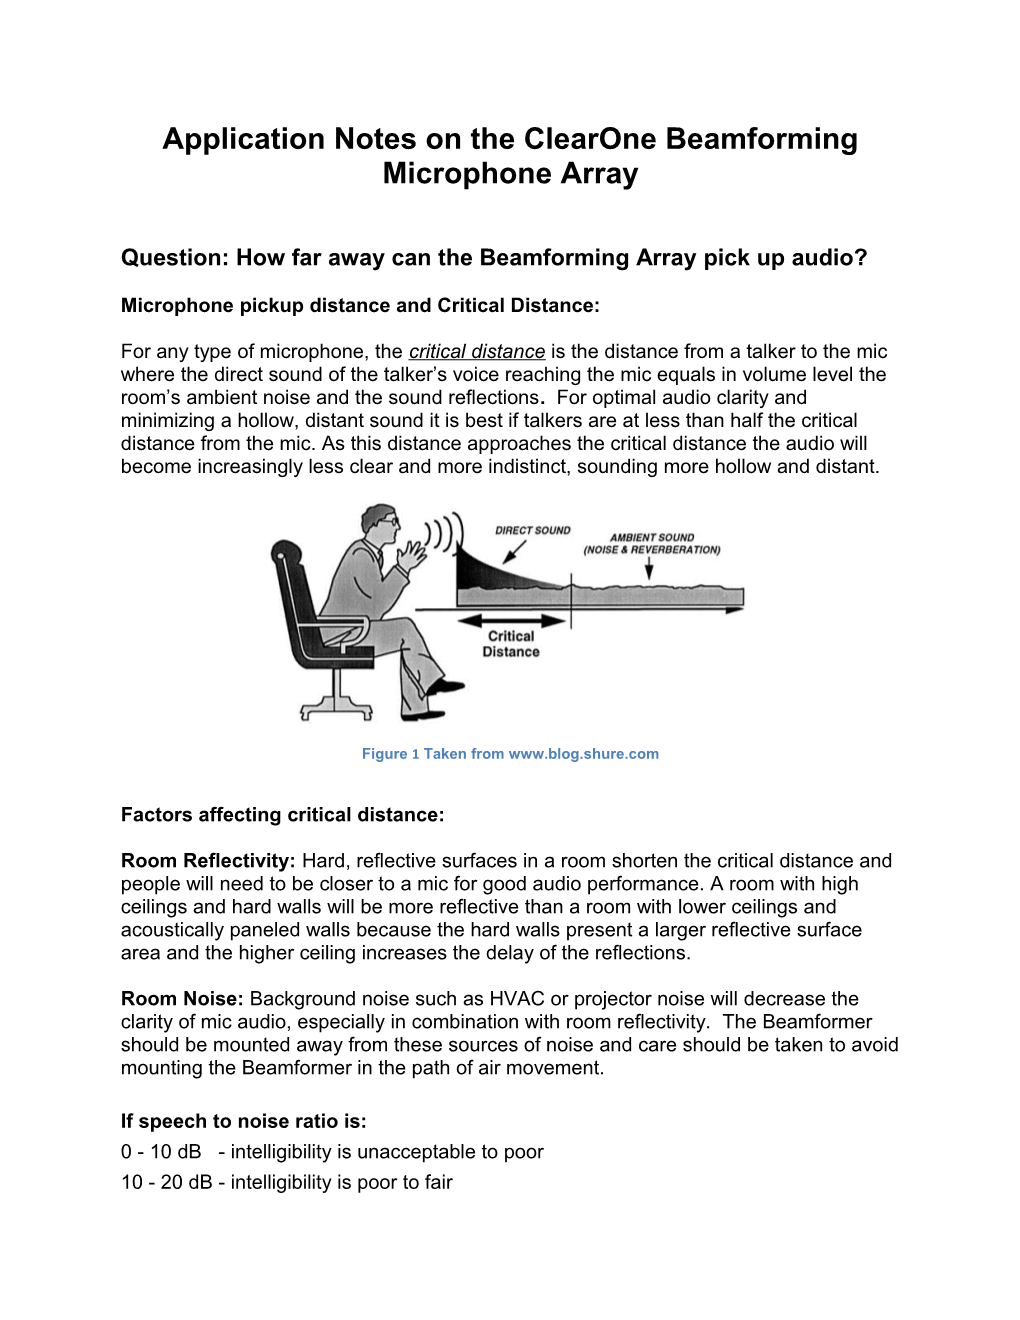 Application Notes on the Clearone Beamforming Microphone Array